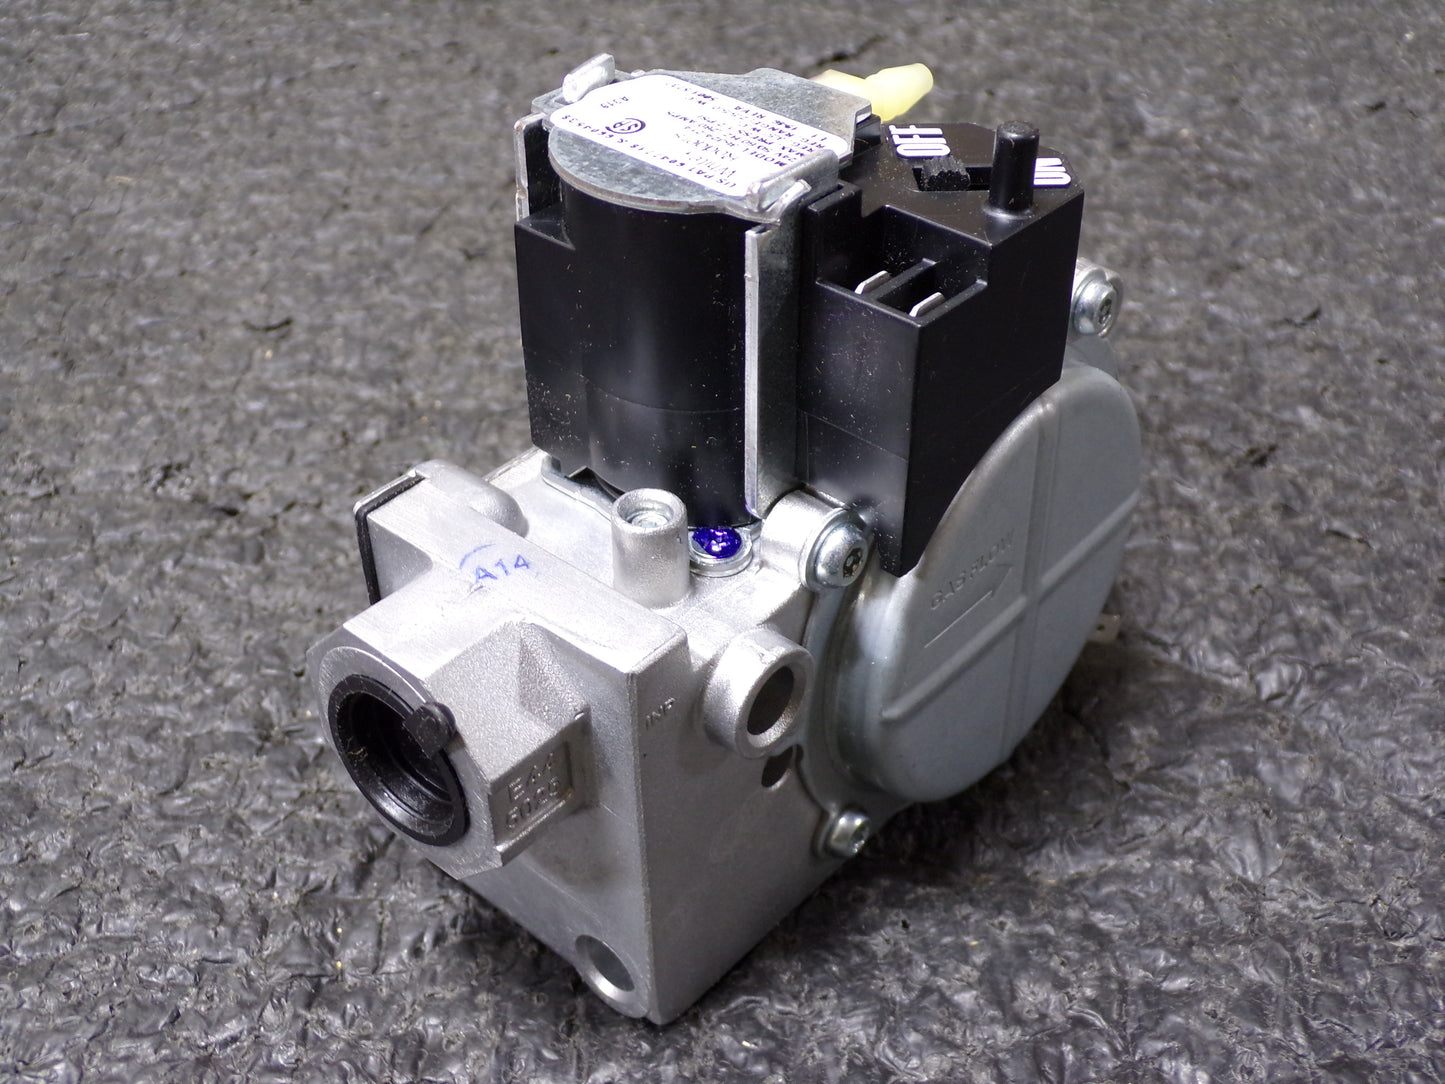 WHITE-RODGERS 36J24-214 Gas Valve, Nat. Gas to LP Conversion, 140,000 BtuH Capacity, Hot Surface Ignition Type, 24 V Coil Volts (CR00682-WTA18)